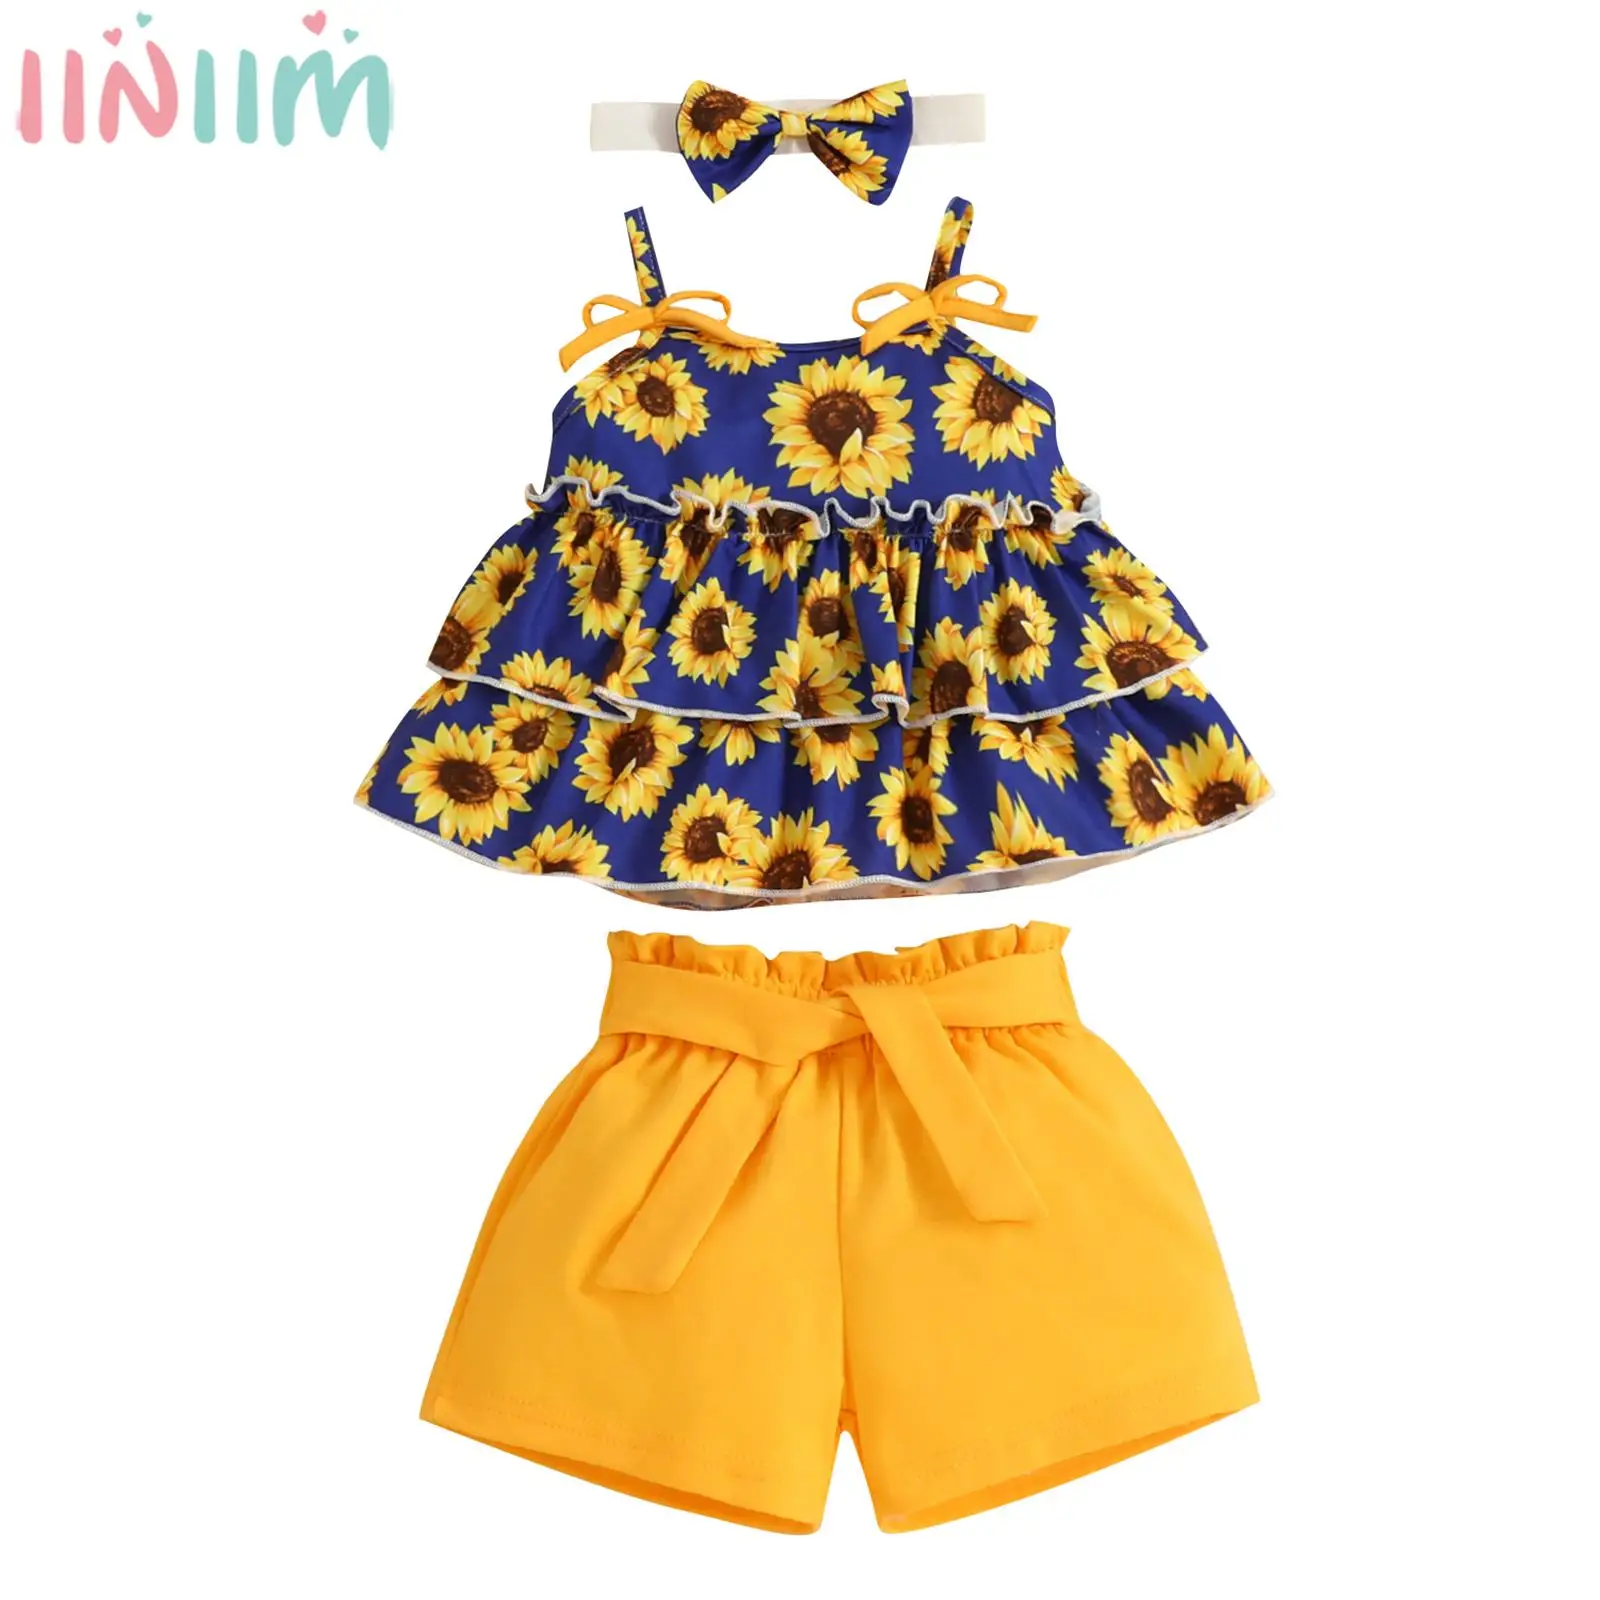 

Baby Girls Summer Casual Sunflower Print Outfits Tiered Sling Crop Top Shorts Bowknot Headwear for Daily Beach Vacation Birthday